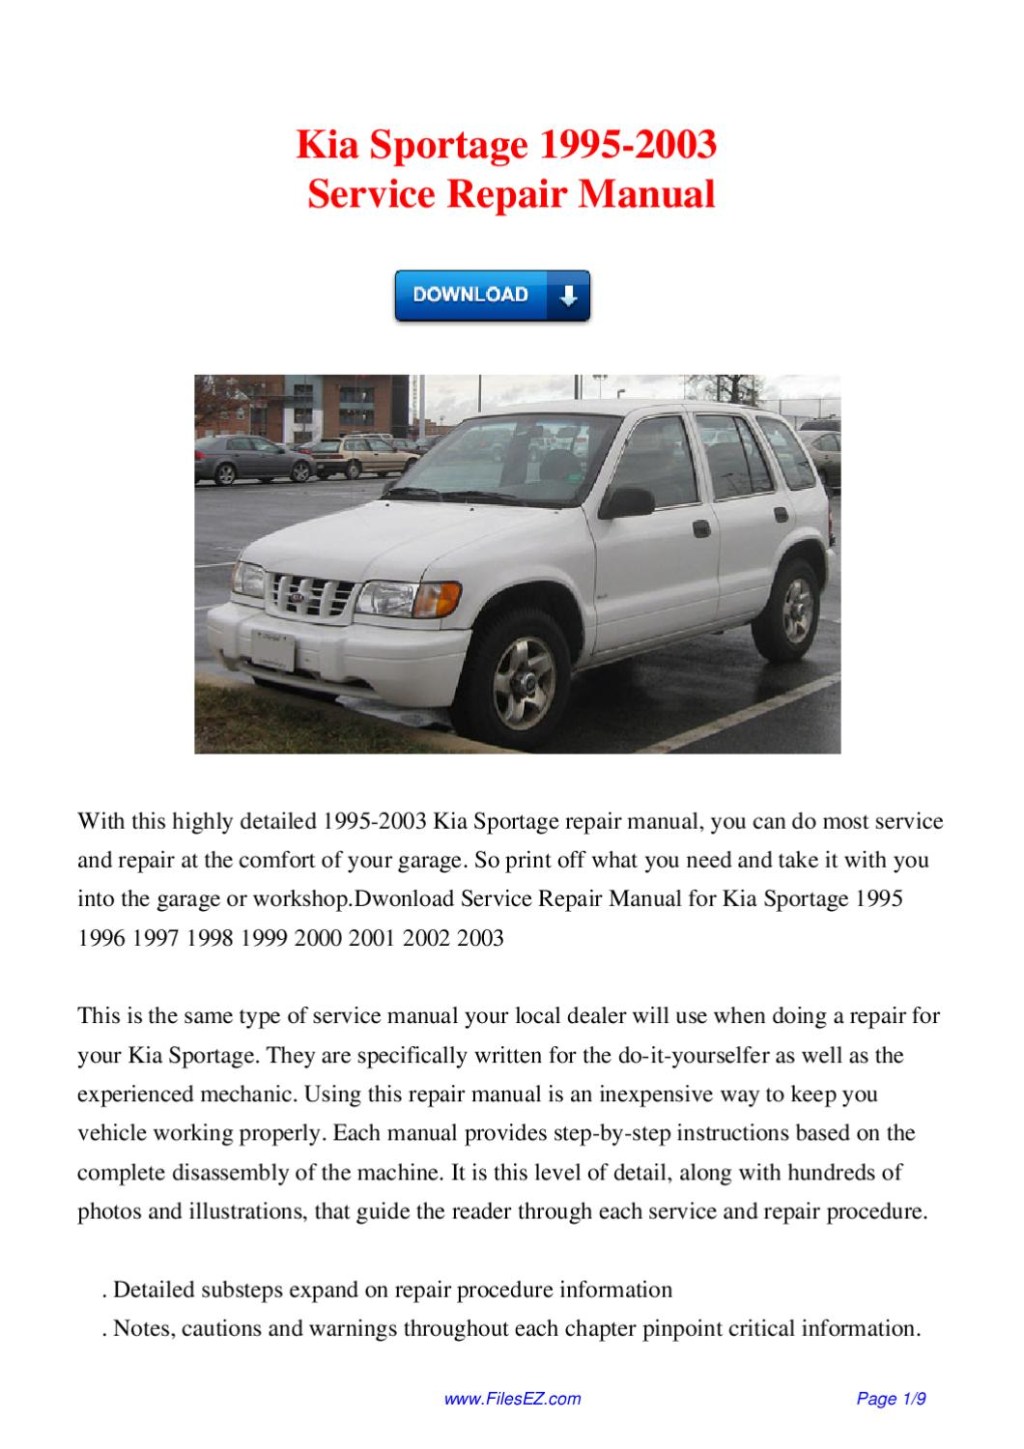 Picture of: Kia Sportage – Service Repair Manual by David Wong – Issuu